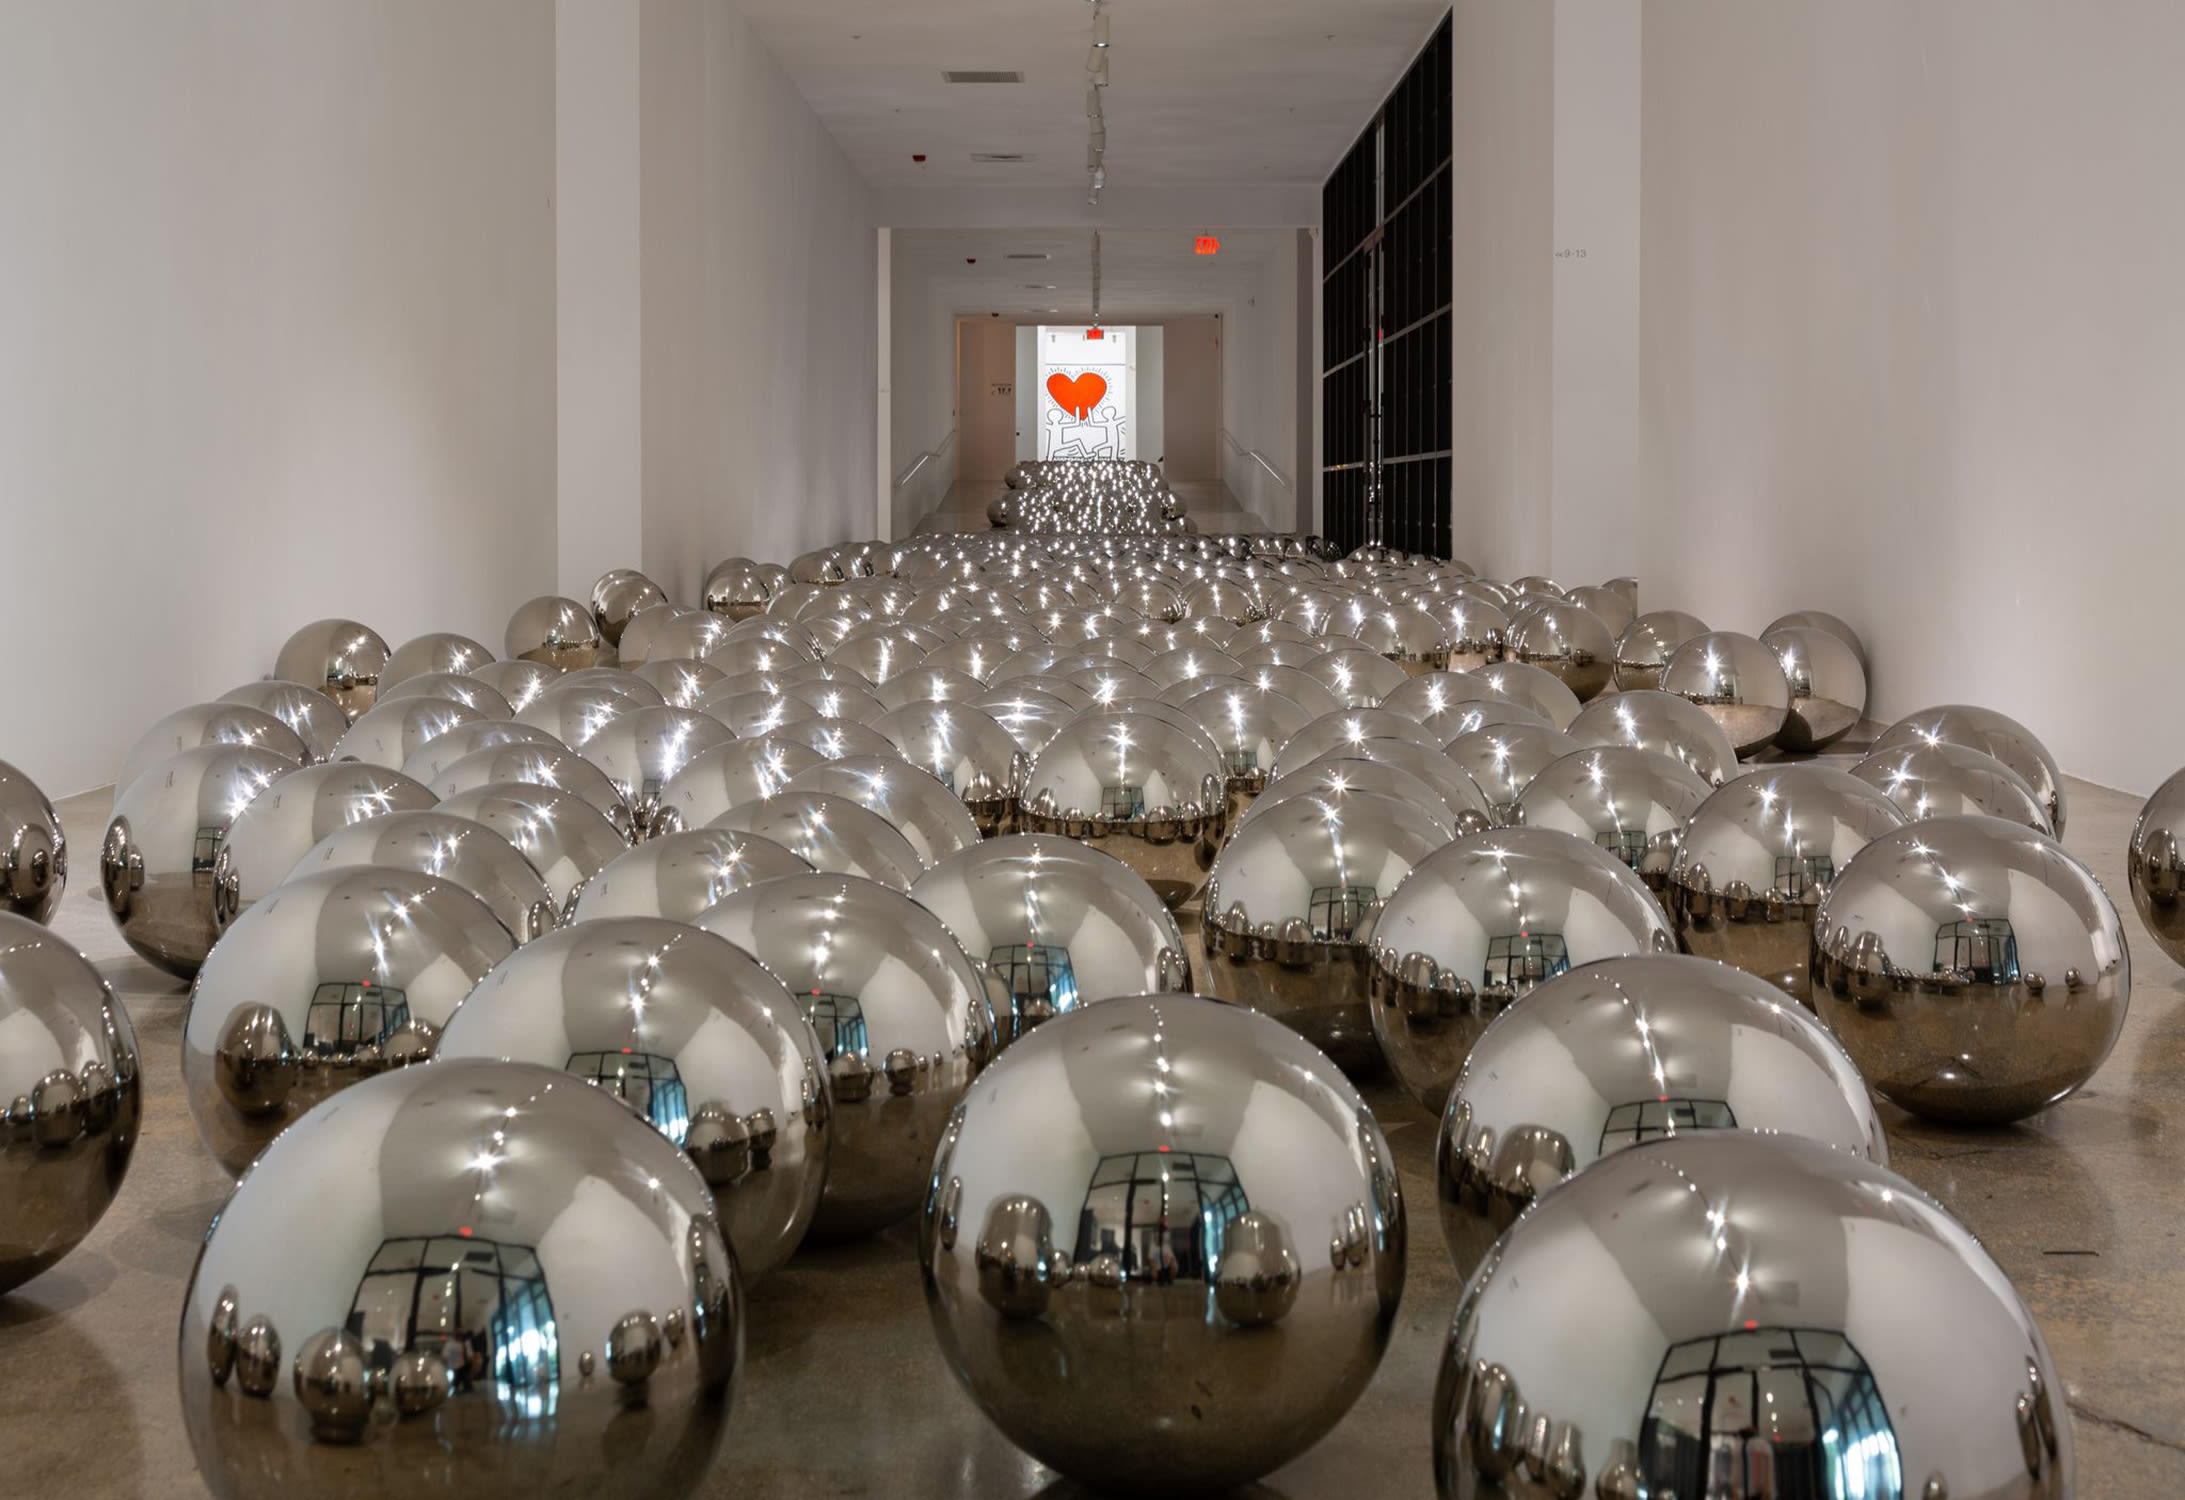 Yayoi Kusama, Narcissus Garden , 1966-. 700 stainless steel spheres, 34cm diameter each, dimensions variable, acquired in 2019. Courtesy of the Rubell Museum, Miami.